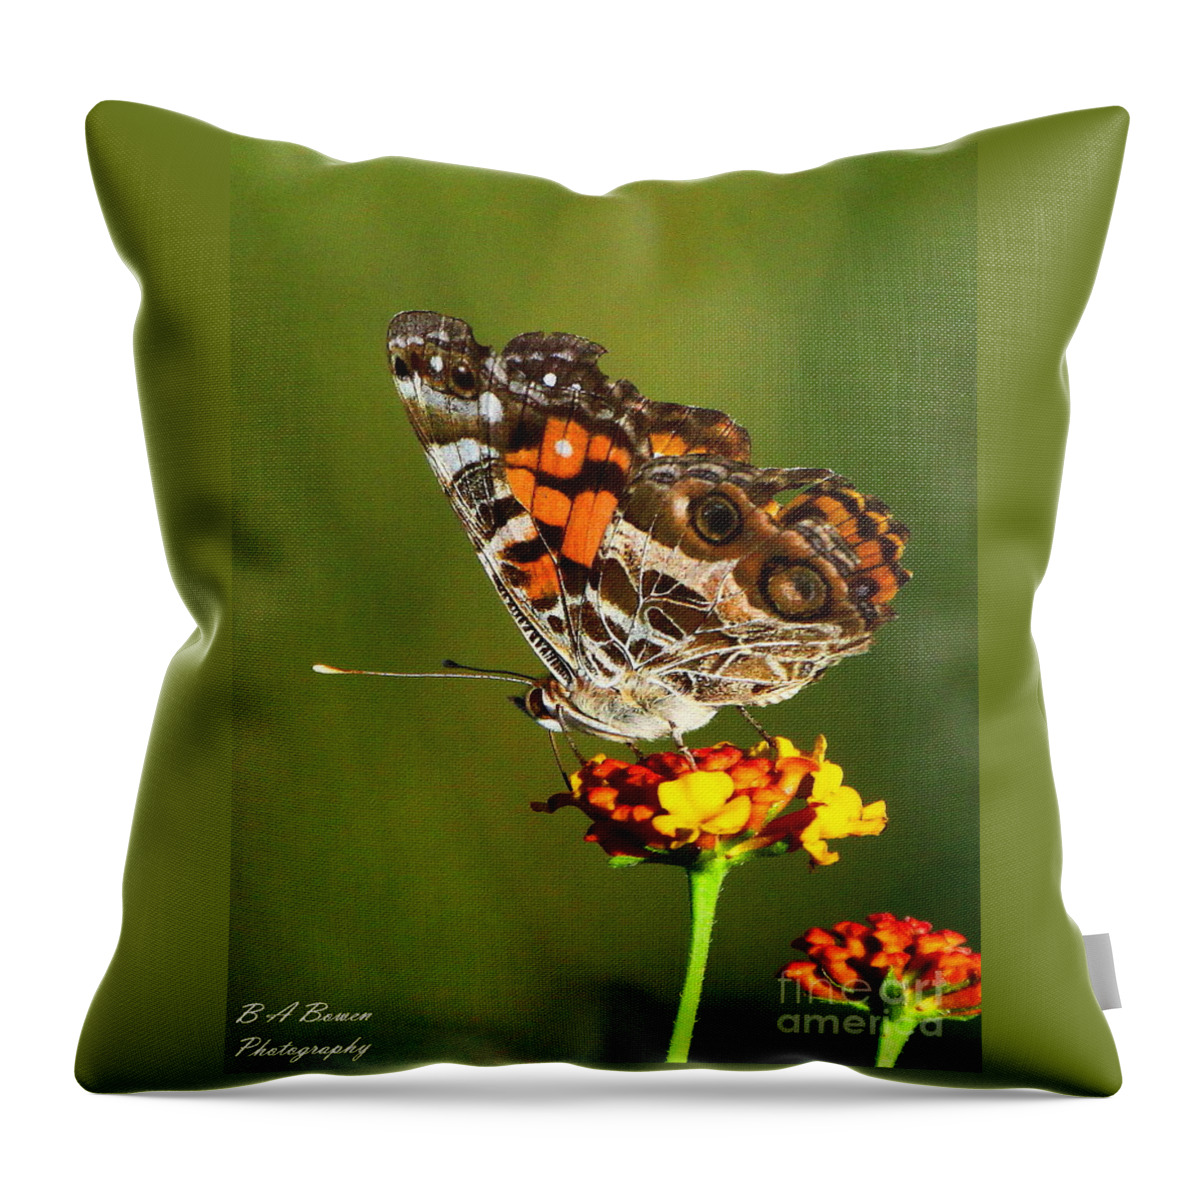 American Painted Lady Throw Pillow featuring the photograph American Painted Lady by Barbara Bowen